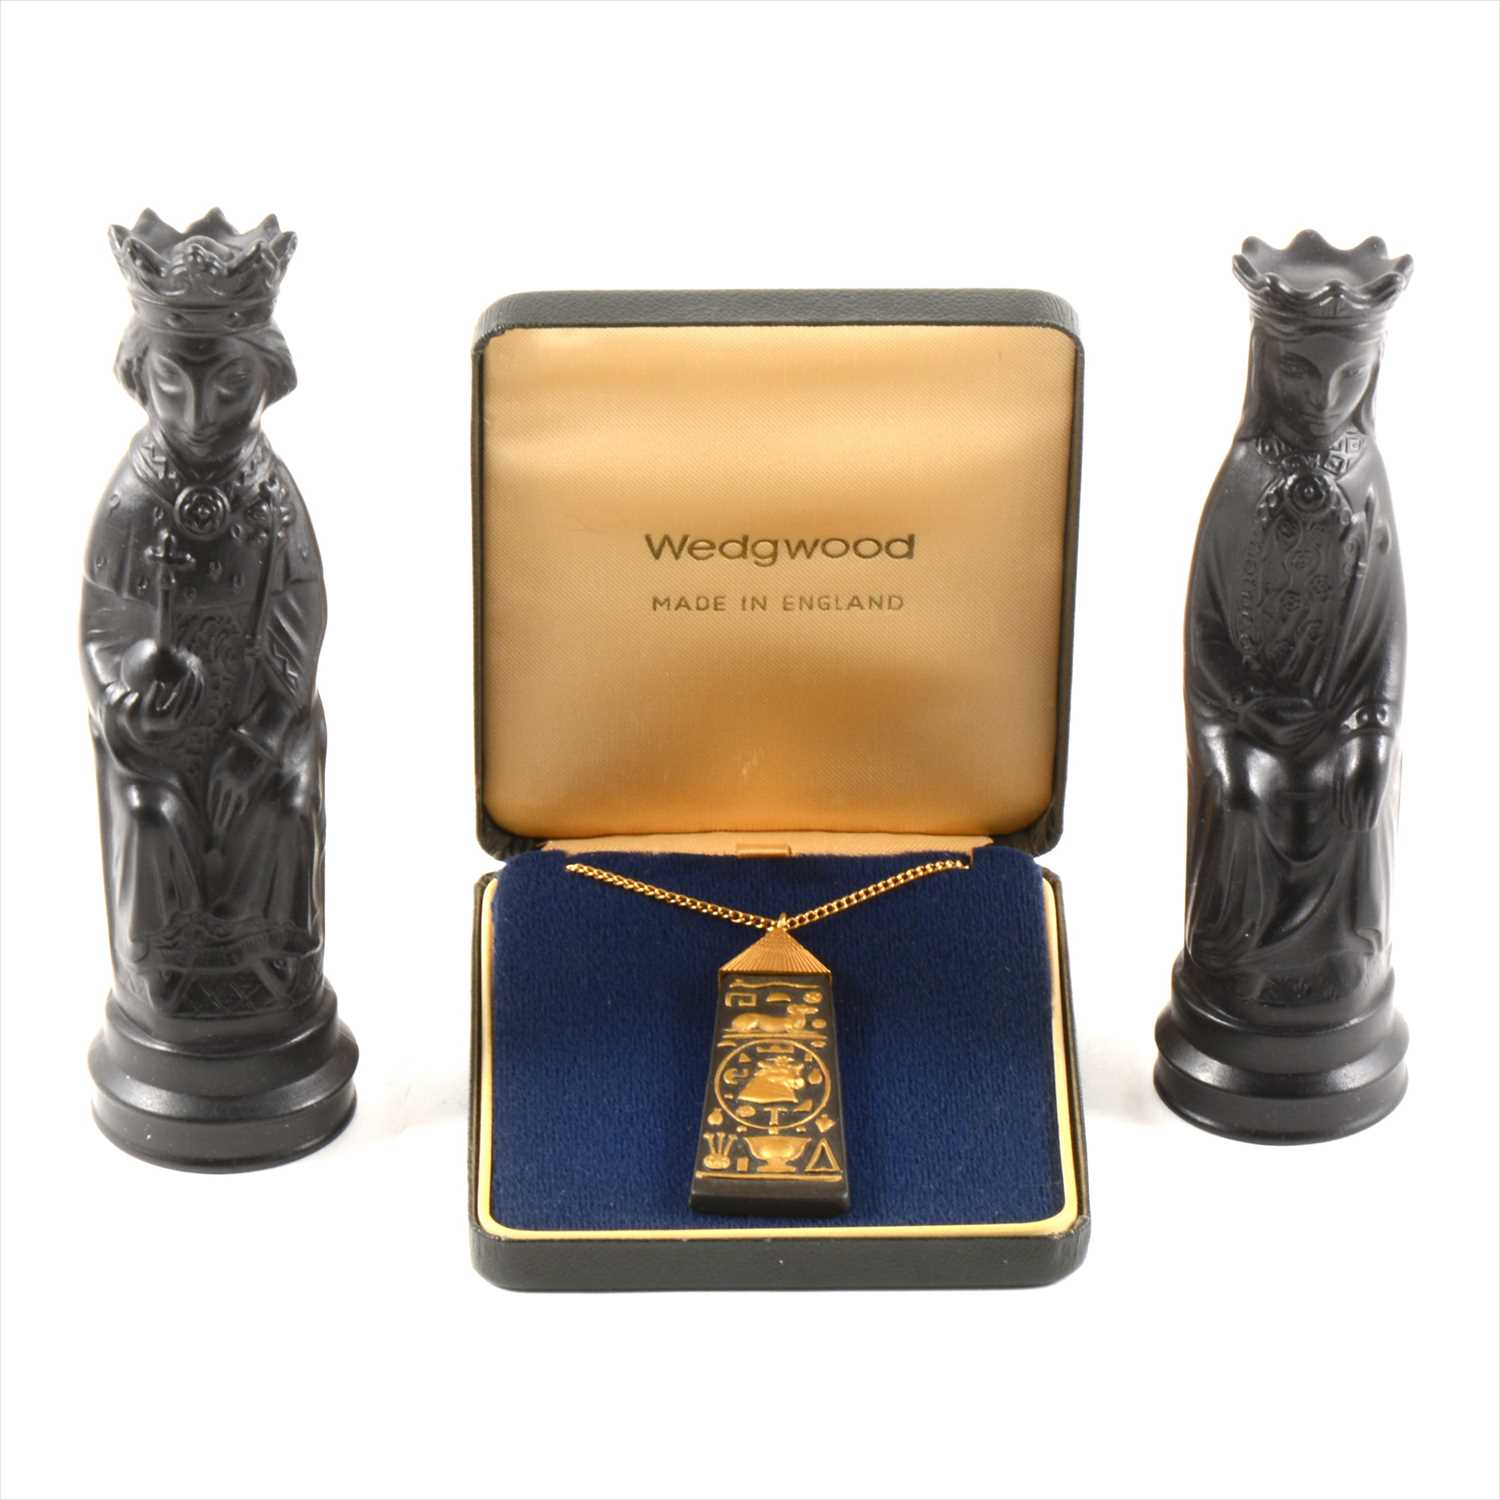 Lot 15 - Arnold Machin for Wedgwood, King and Queen chess pieces, and a Wedgwood pendant.